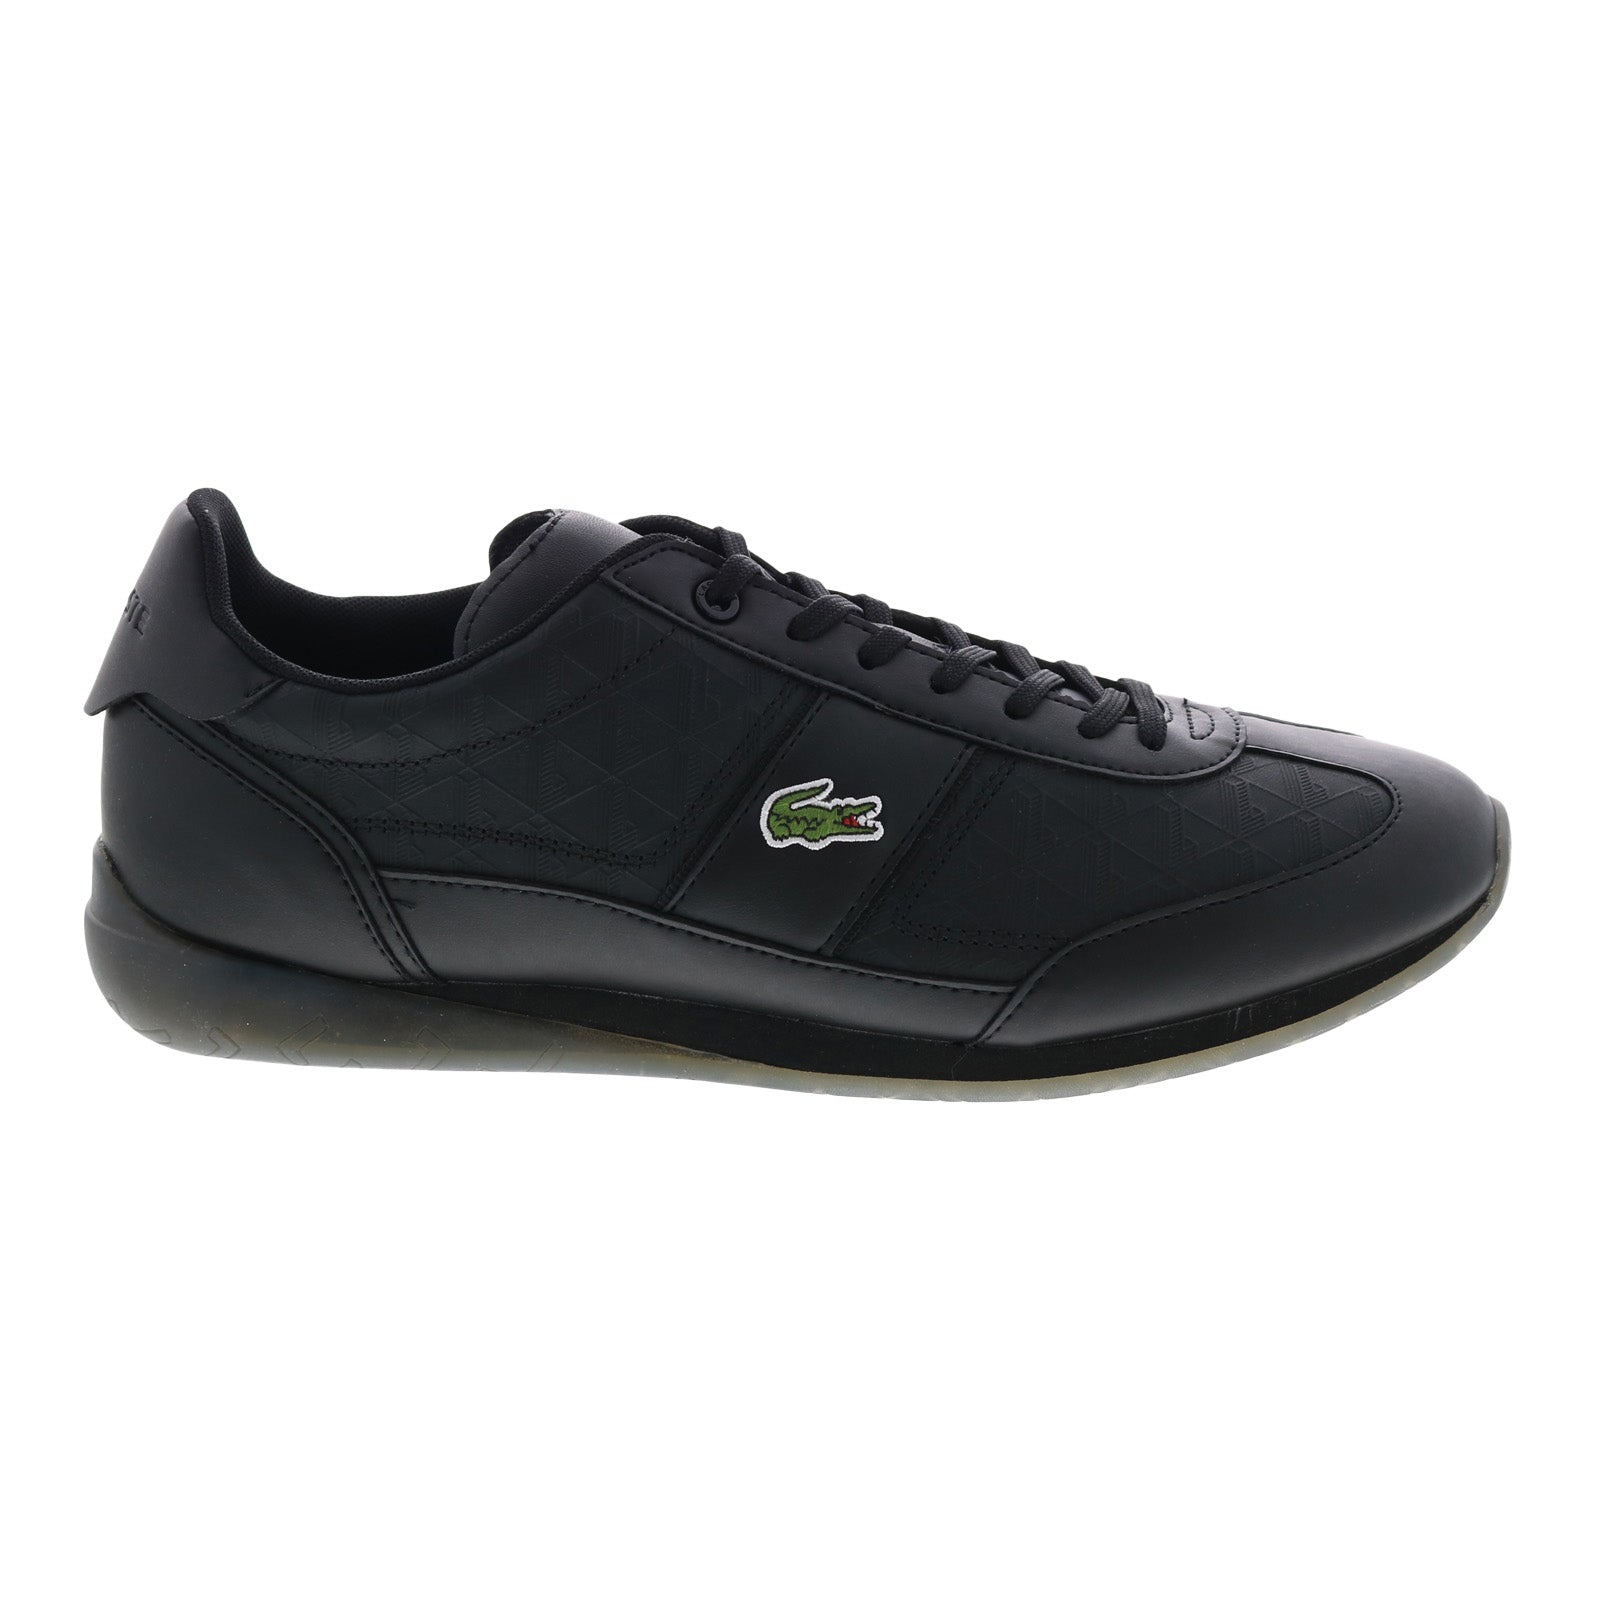 Lacoste Angular 222 5 Cma Mens Leather Lifestyle Sneakers Shoes - Shoes